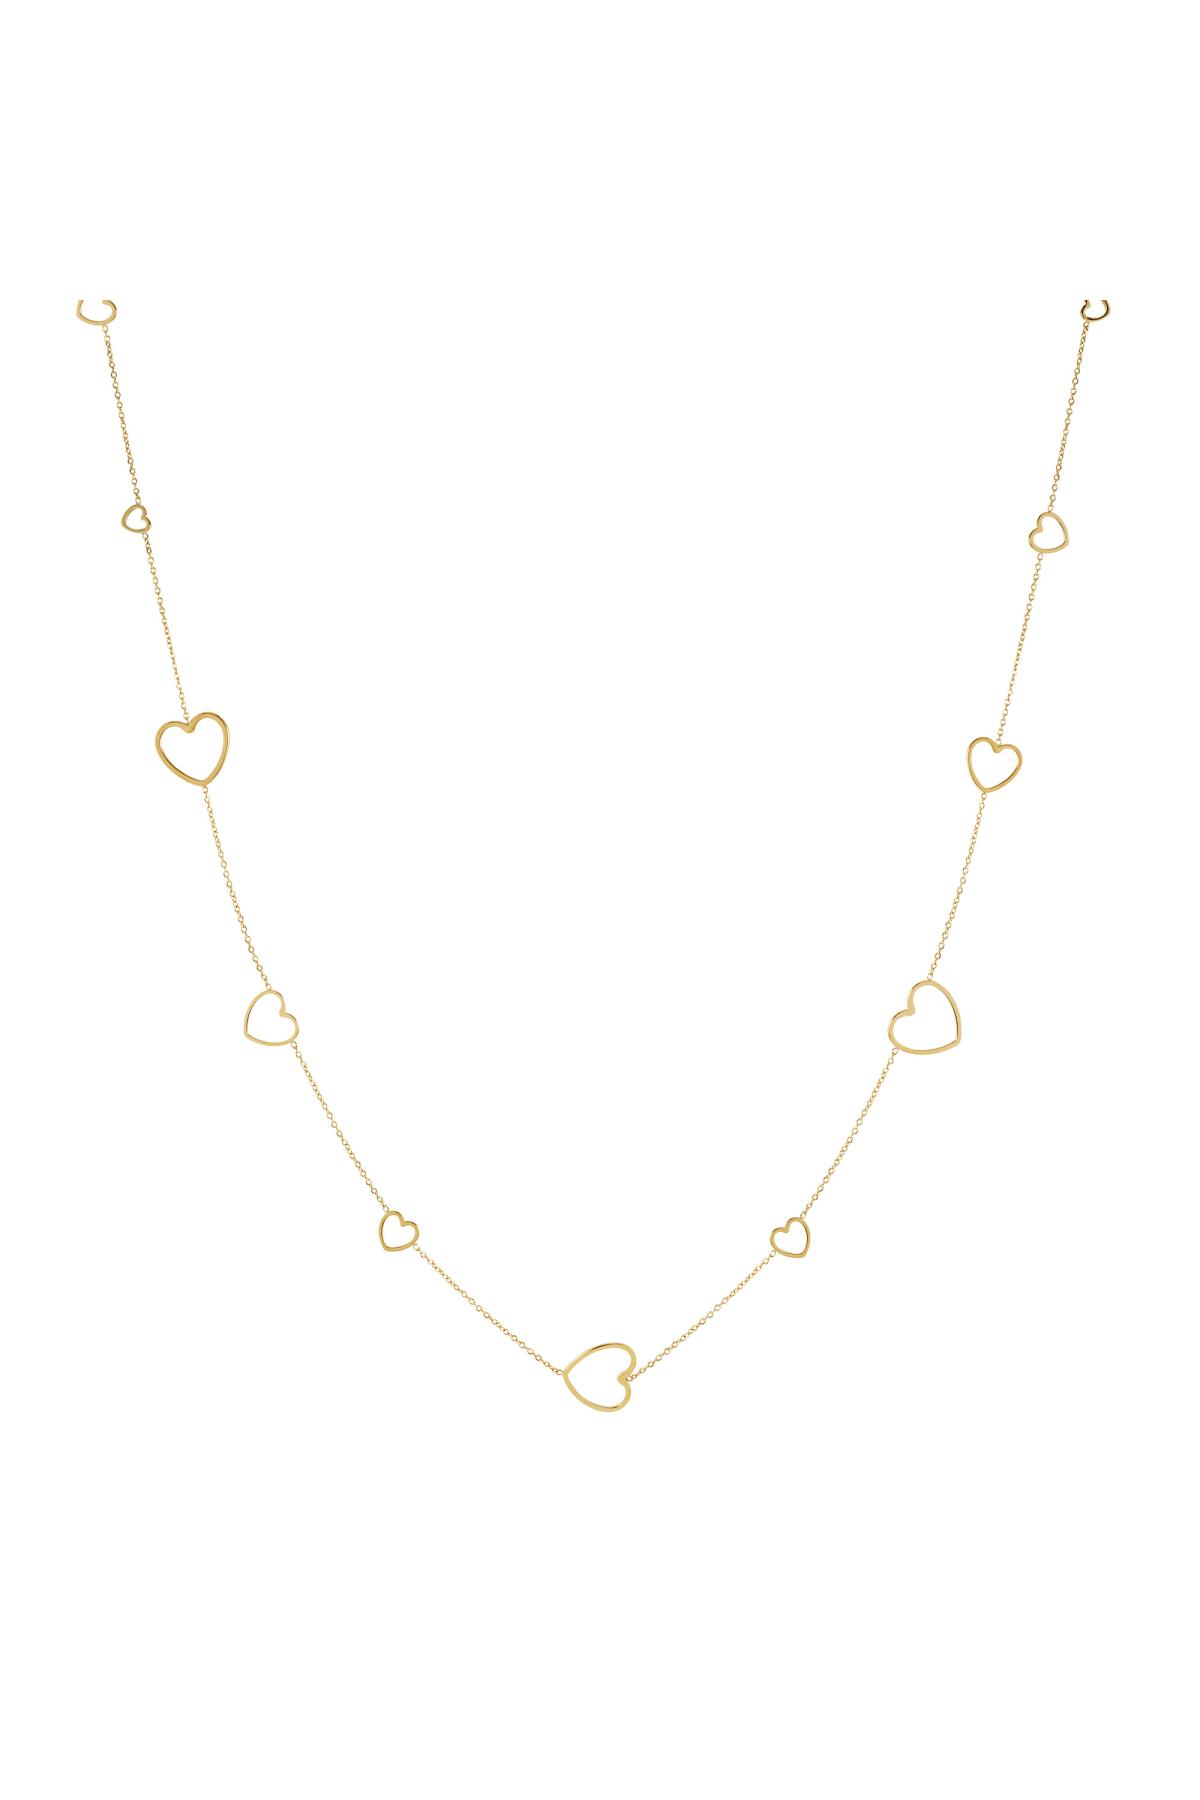 Long chain hearts Gold Stainless Steel